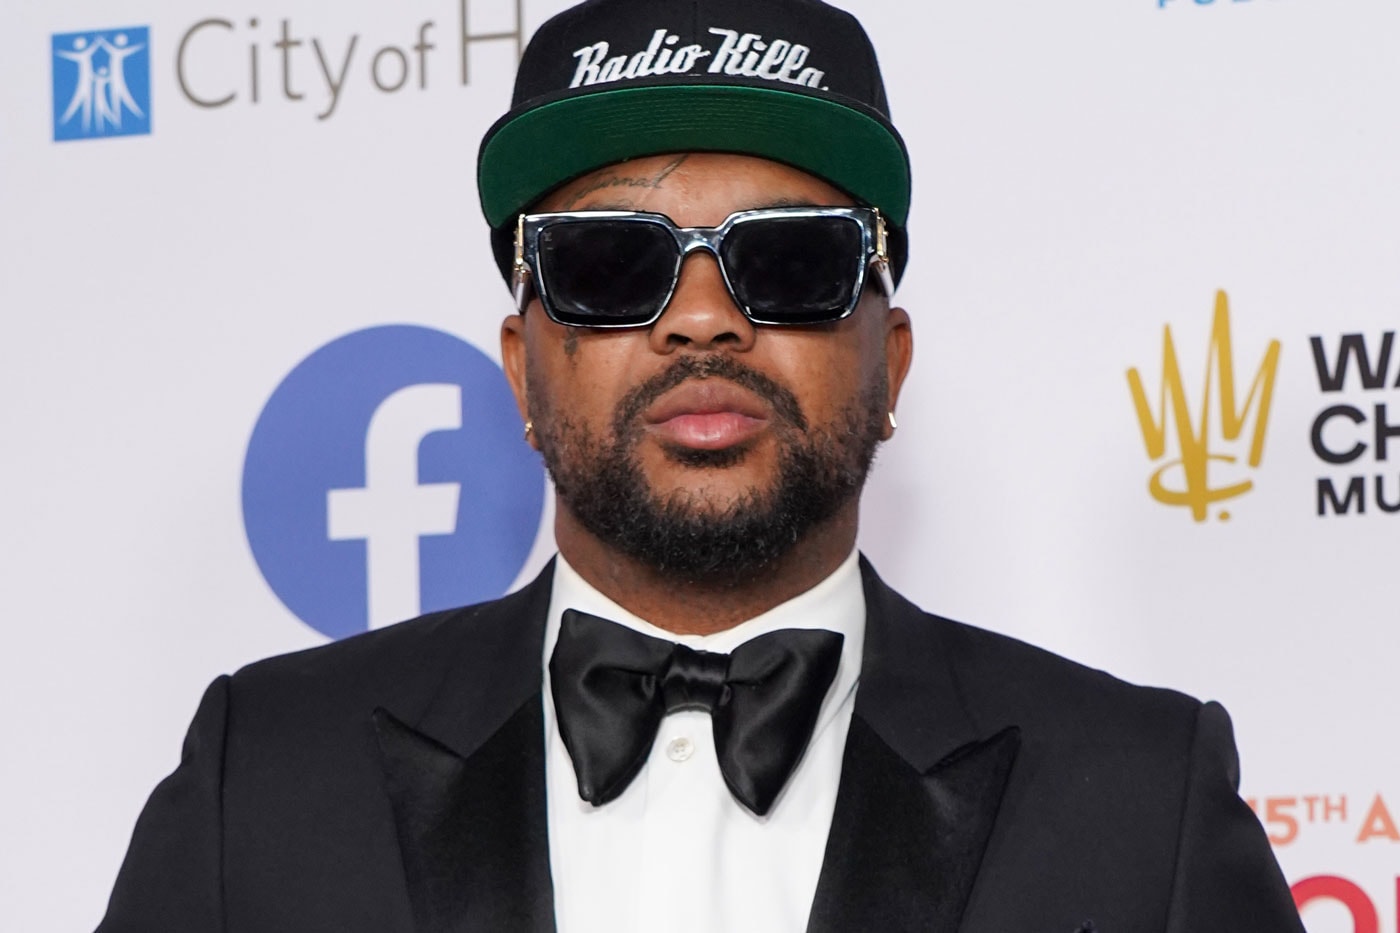 The-Dream Just Dropped a New Project Inspired Entirely by the King of Soul